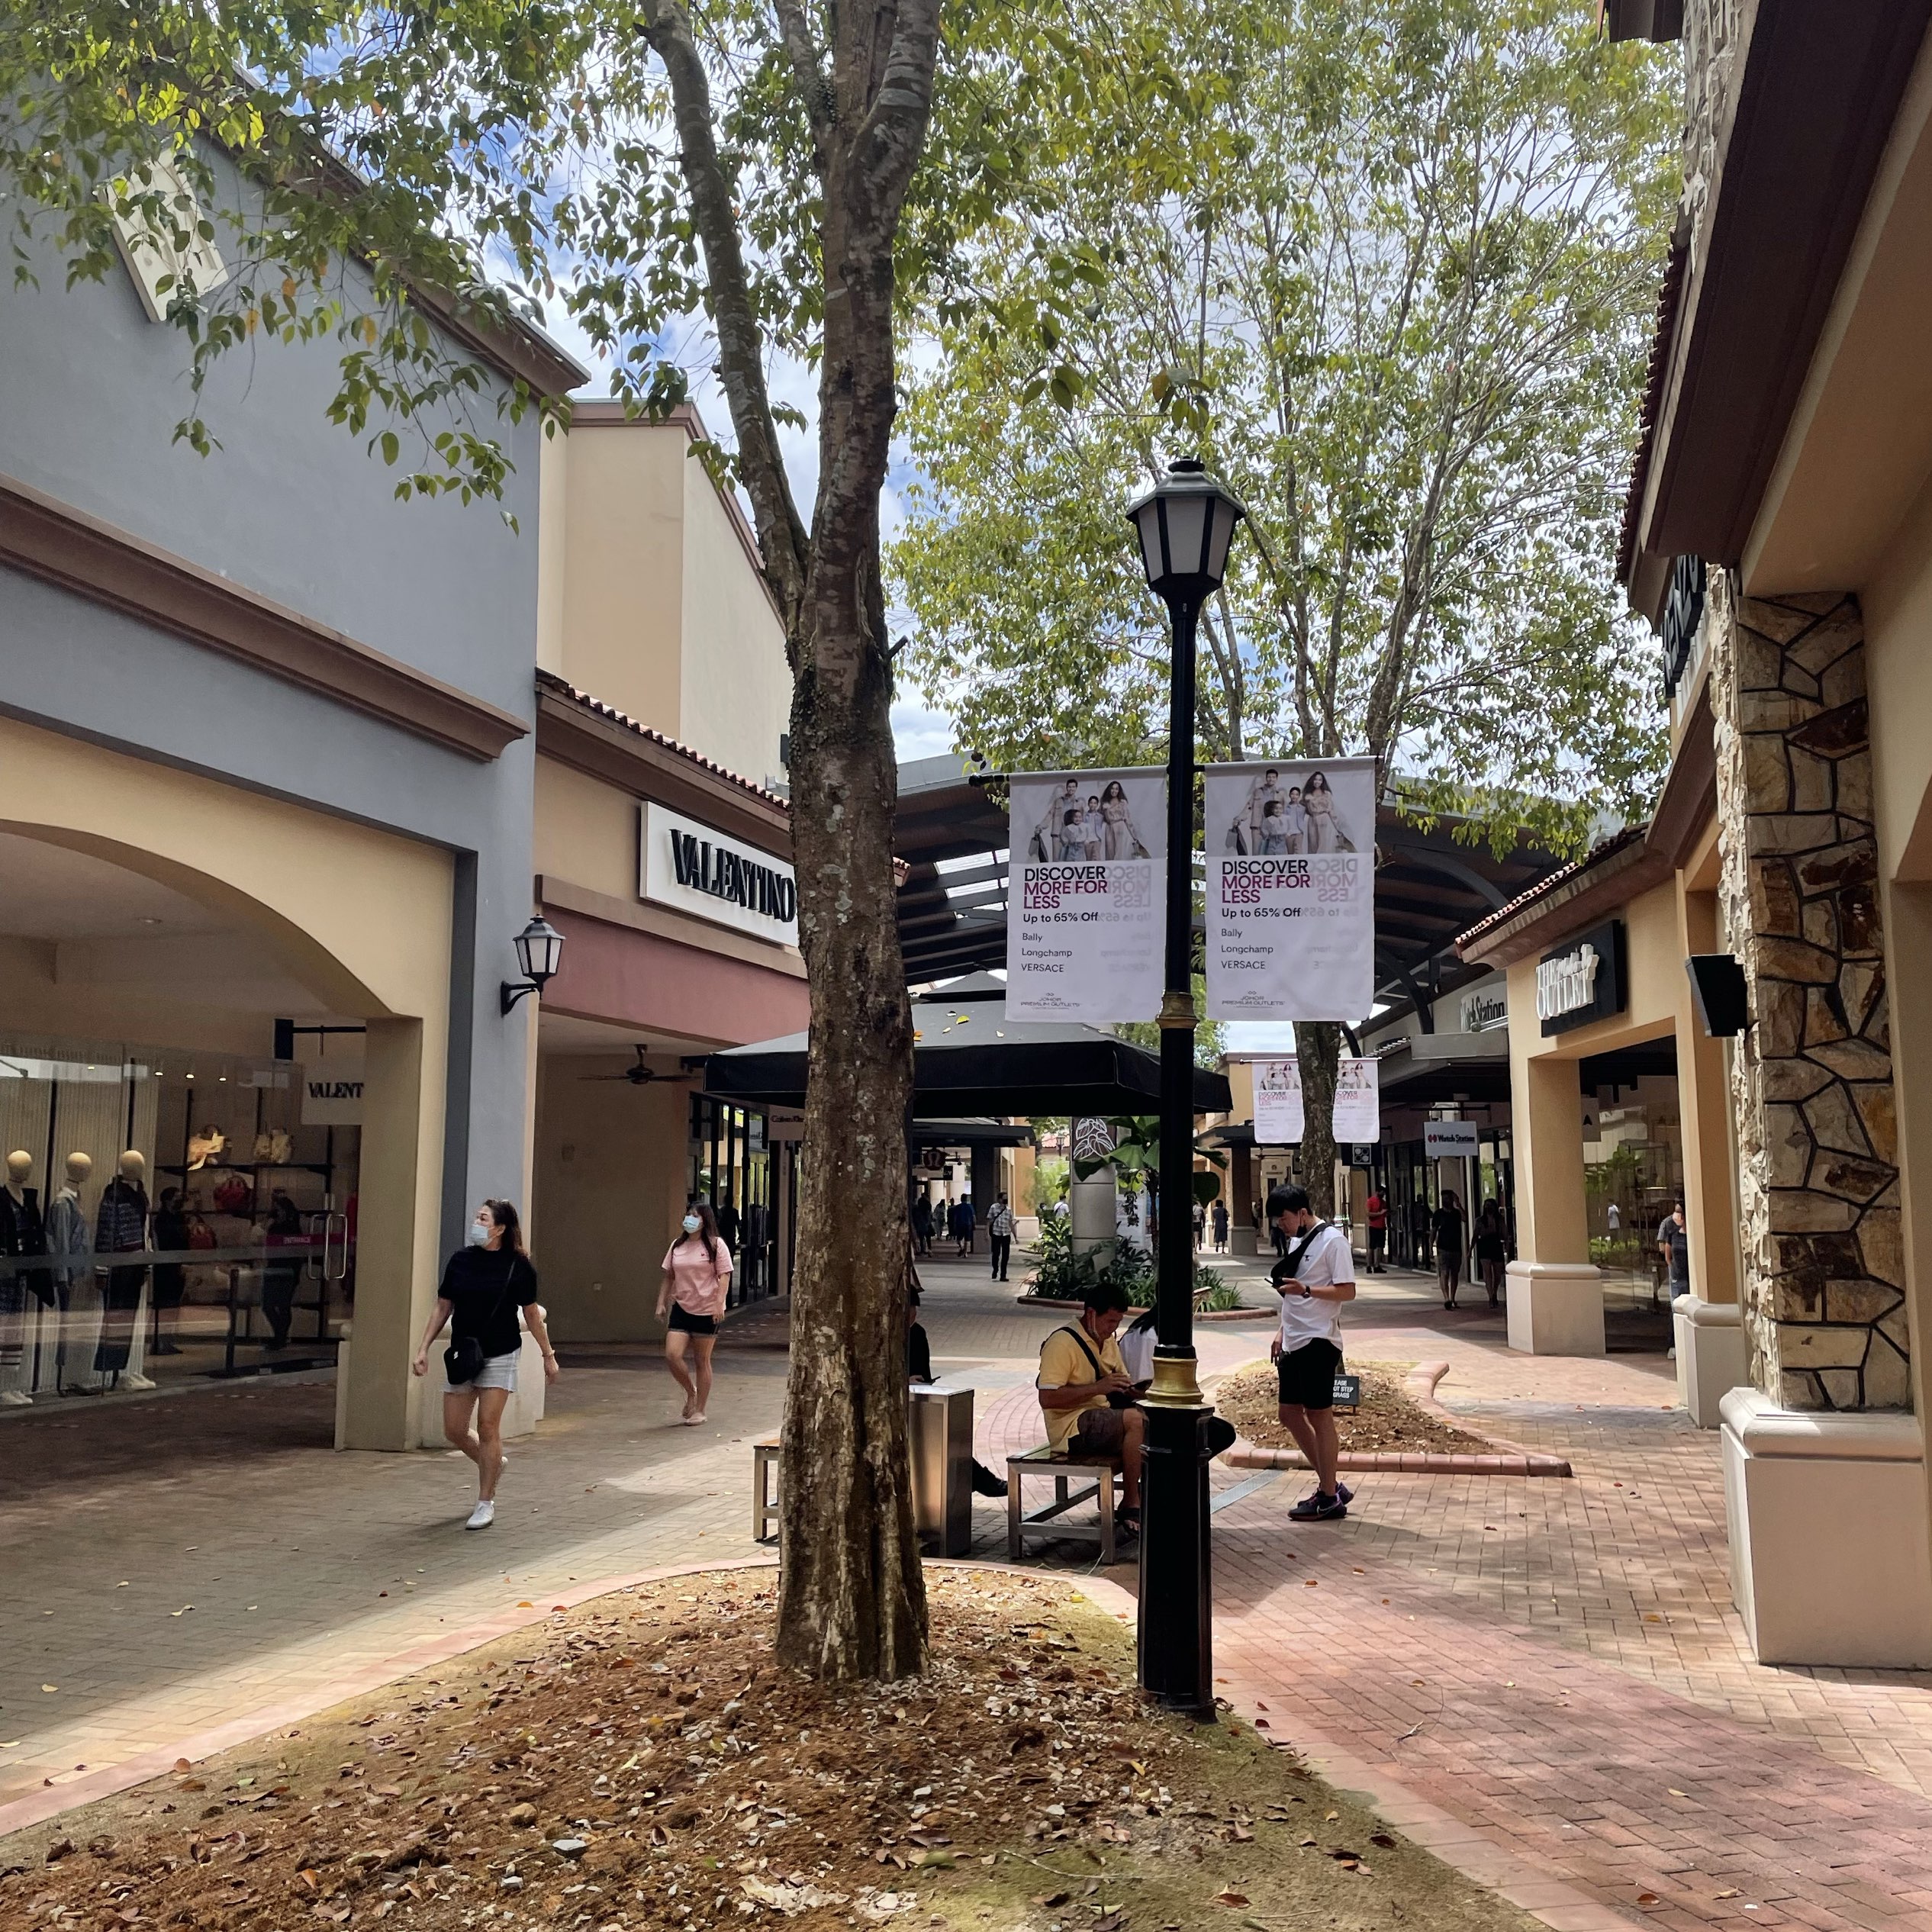 The Definitive Guide to Johor Premium Outlets Sale in December 2021